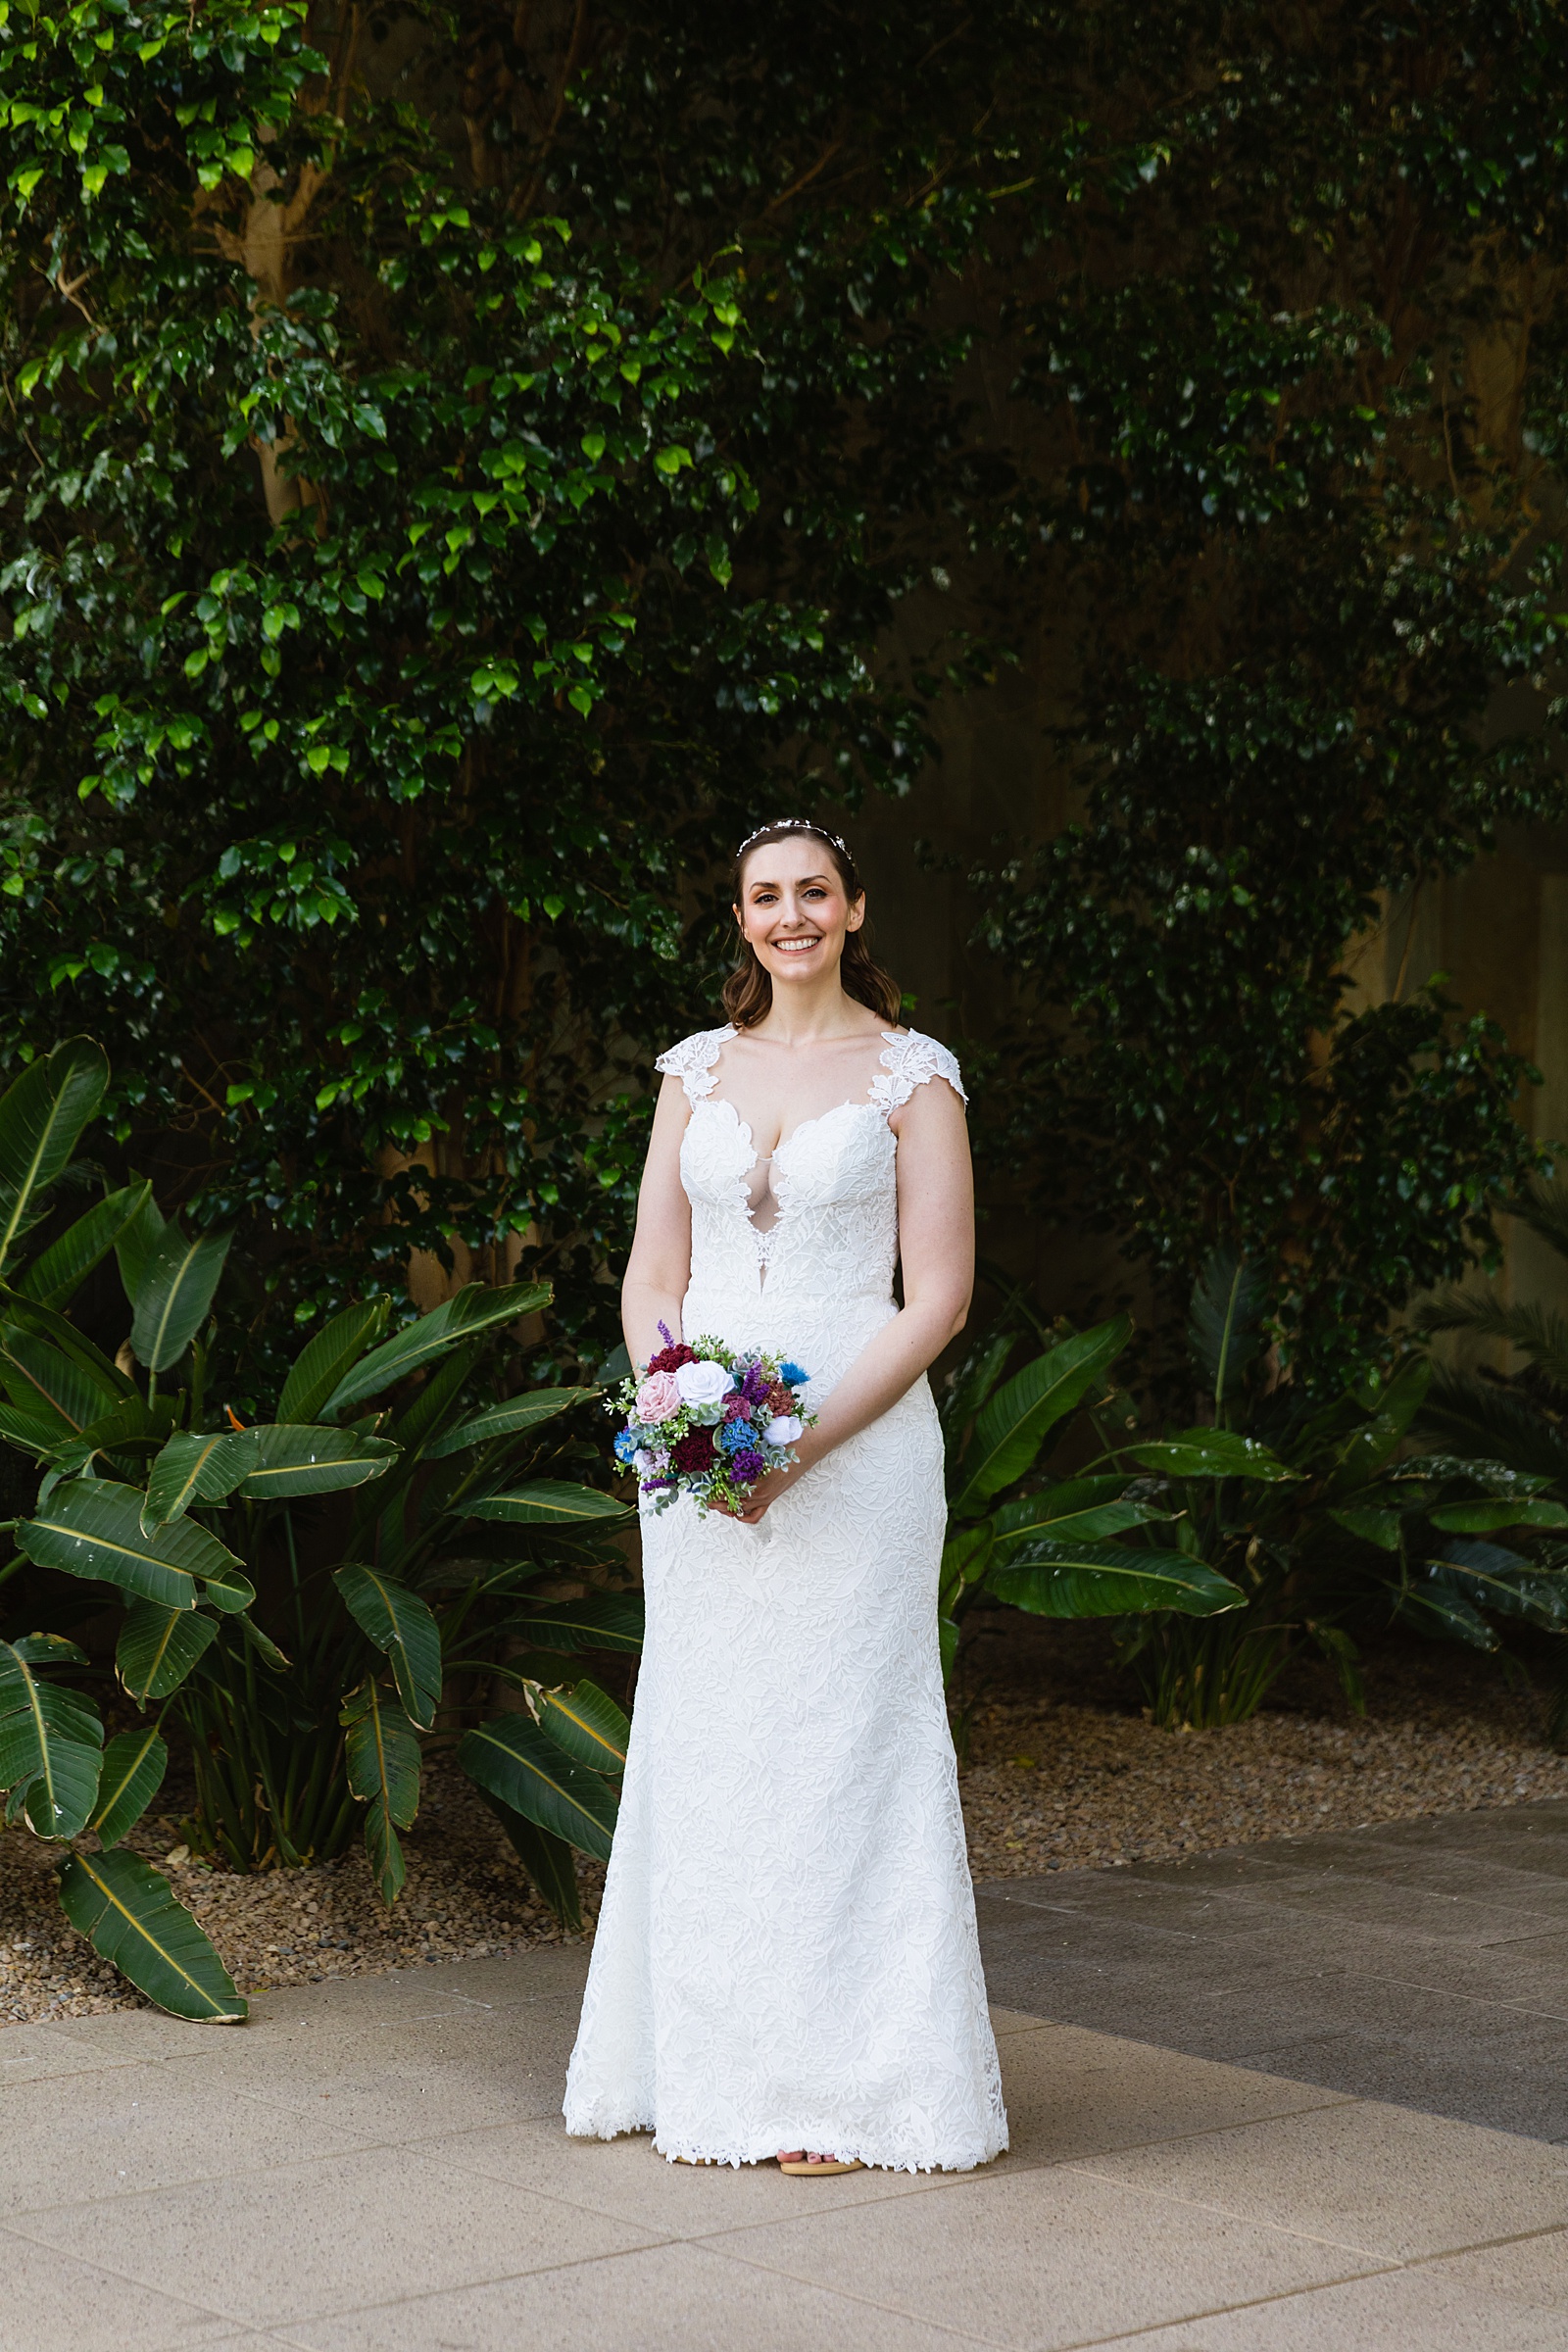 Bride's Low V Sweetheart wedding dress for her Chandler Community Center wedding by PMA Photography.